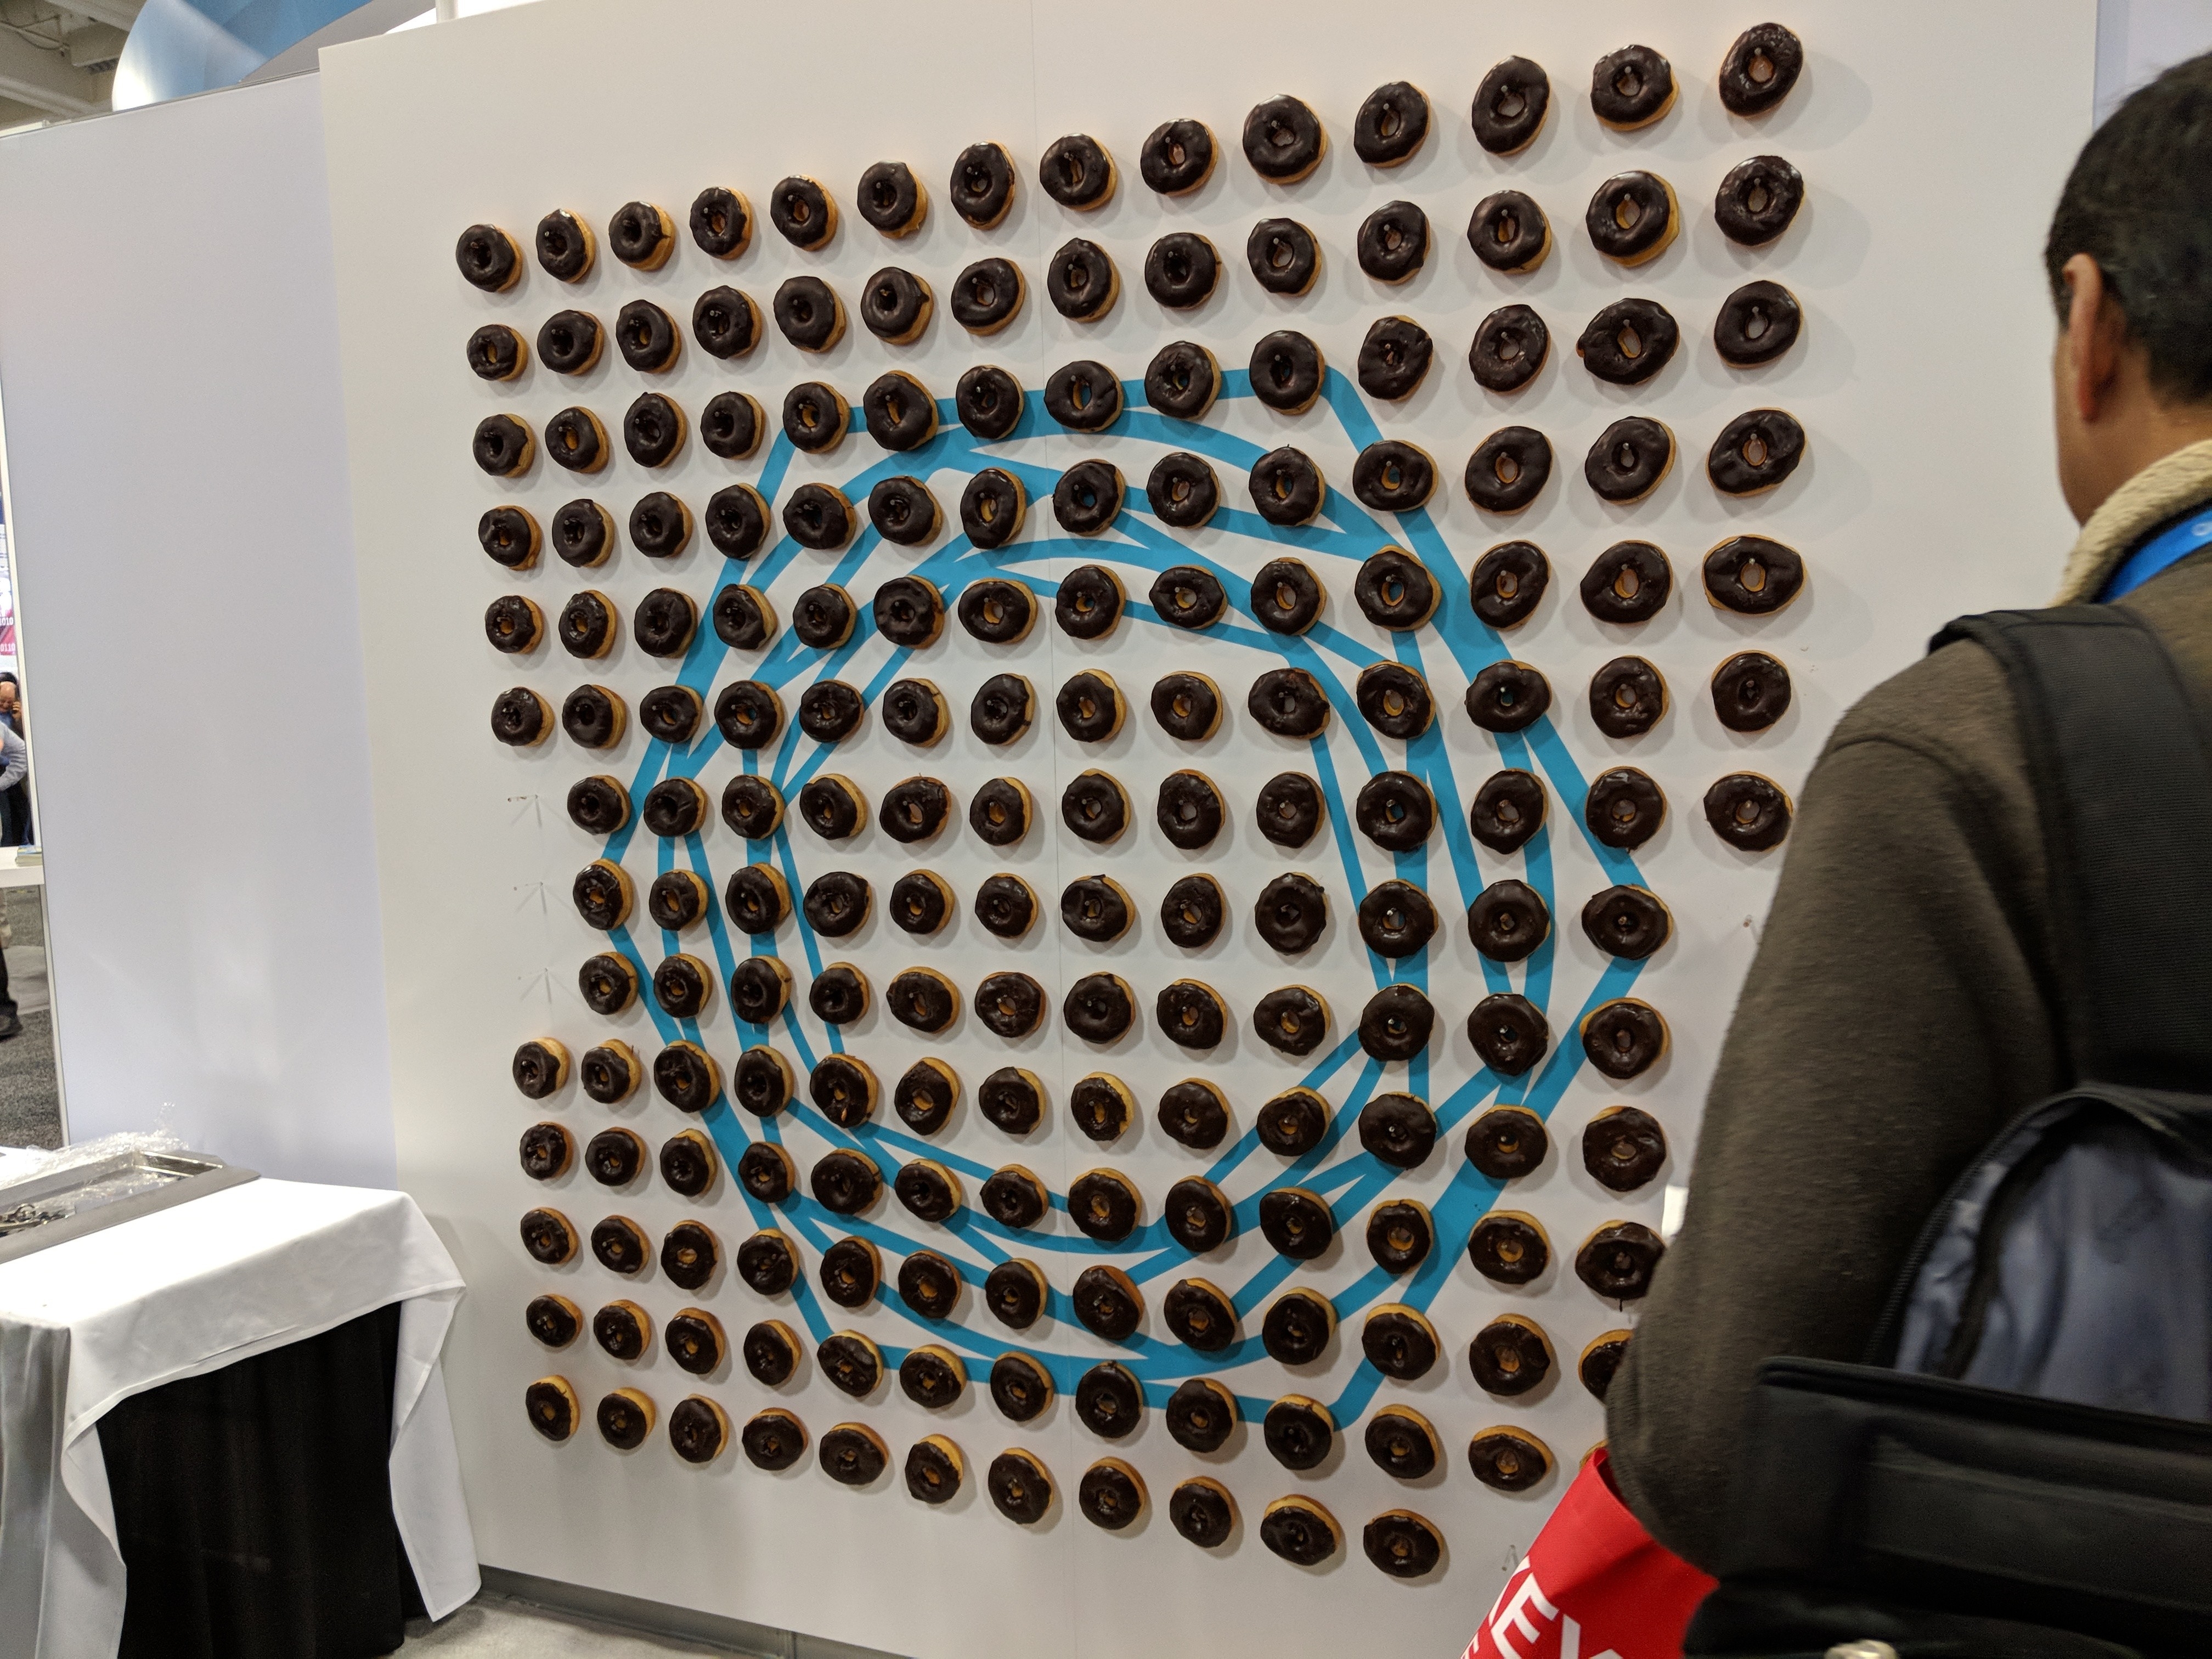 More tradeshow shenanigans: a donut wall